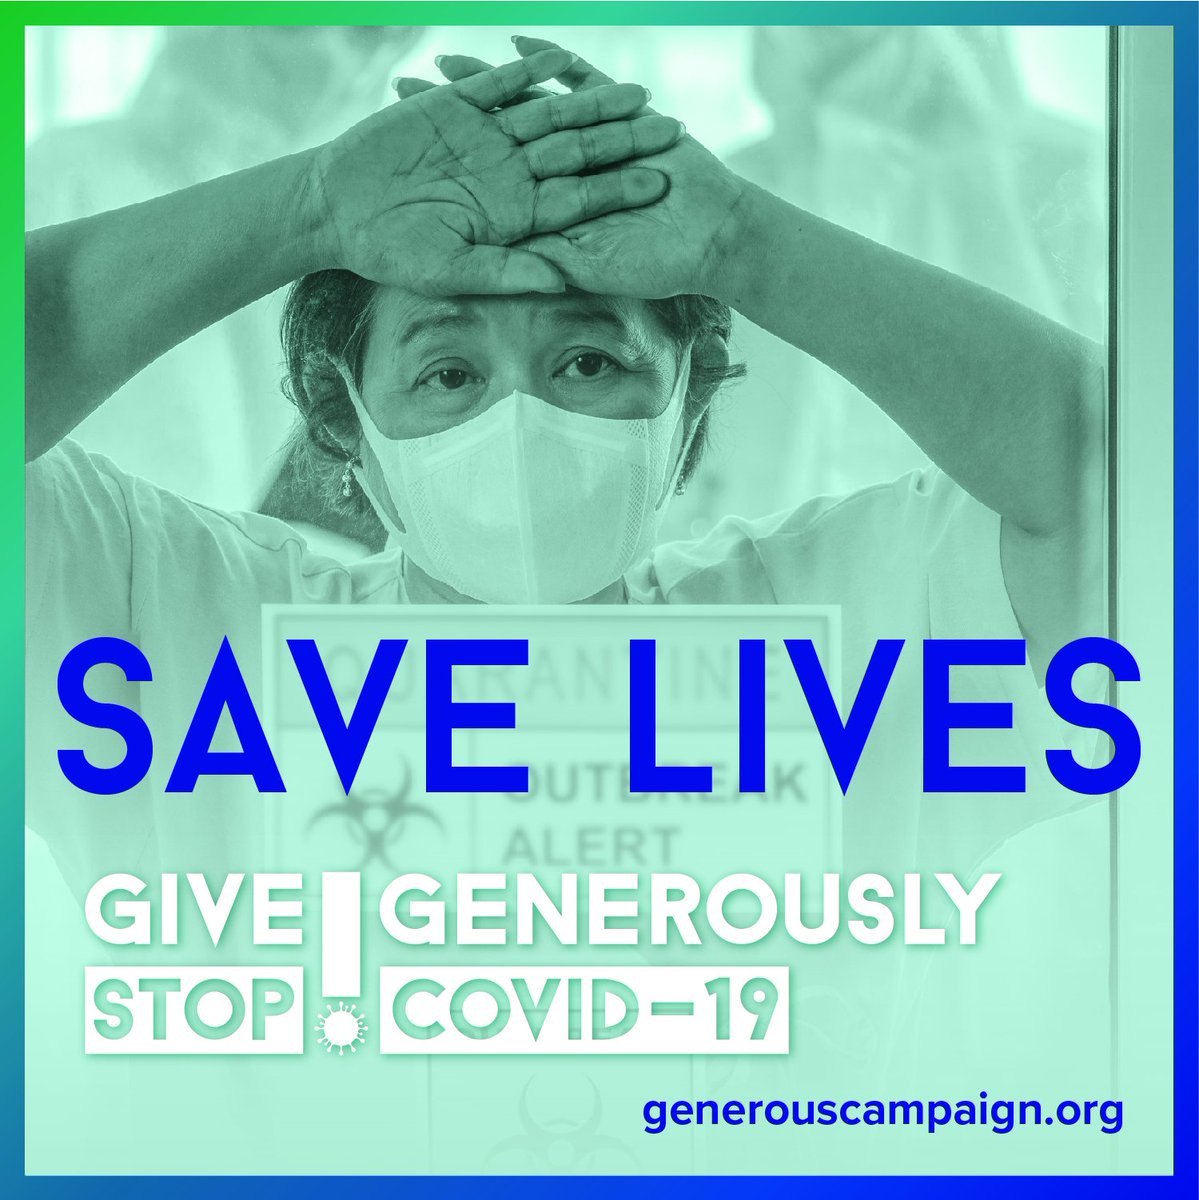 Join the #GenerousCampaign ahead of the virtual @WorldBank Spring Meetings (Apr 17-19) as we urge the @G20org, IMF (@IMFNews @KGeorgieva) and World Bank to #GiveGenerously to developing countries and #EndCOVID19Now!